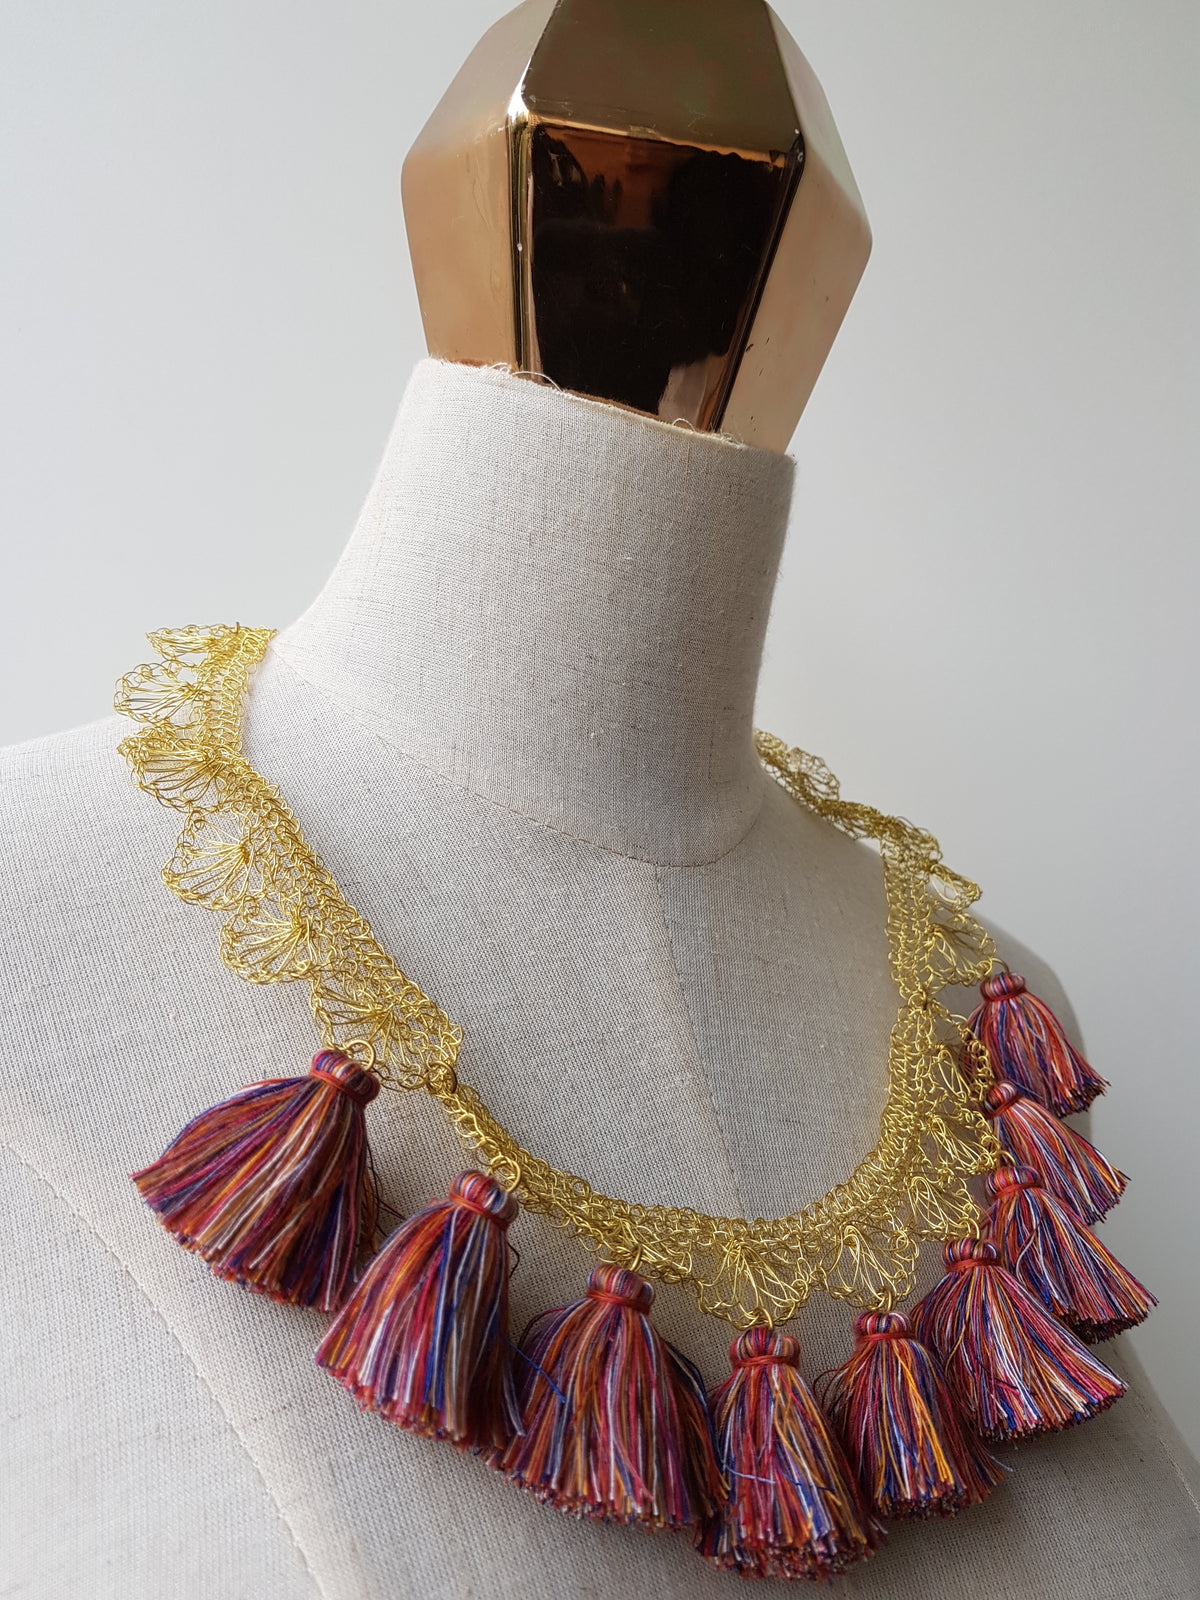 Louisa Crochet Brass Necklace (Mixed Colours-Red, Blue, Orange, White)